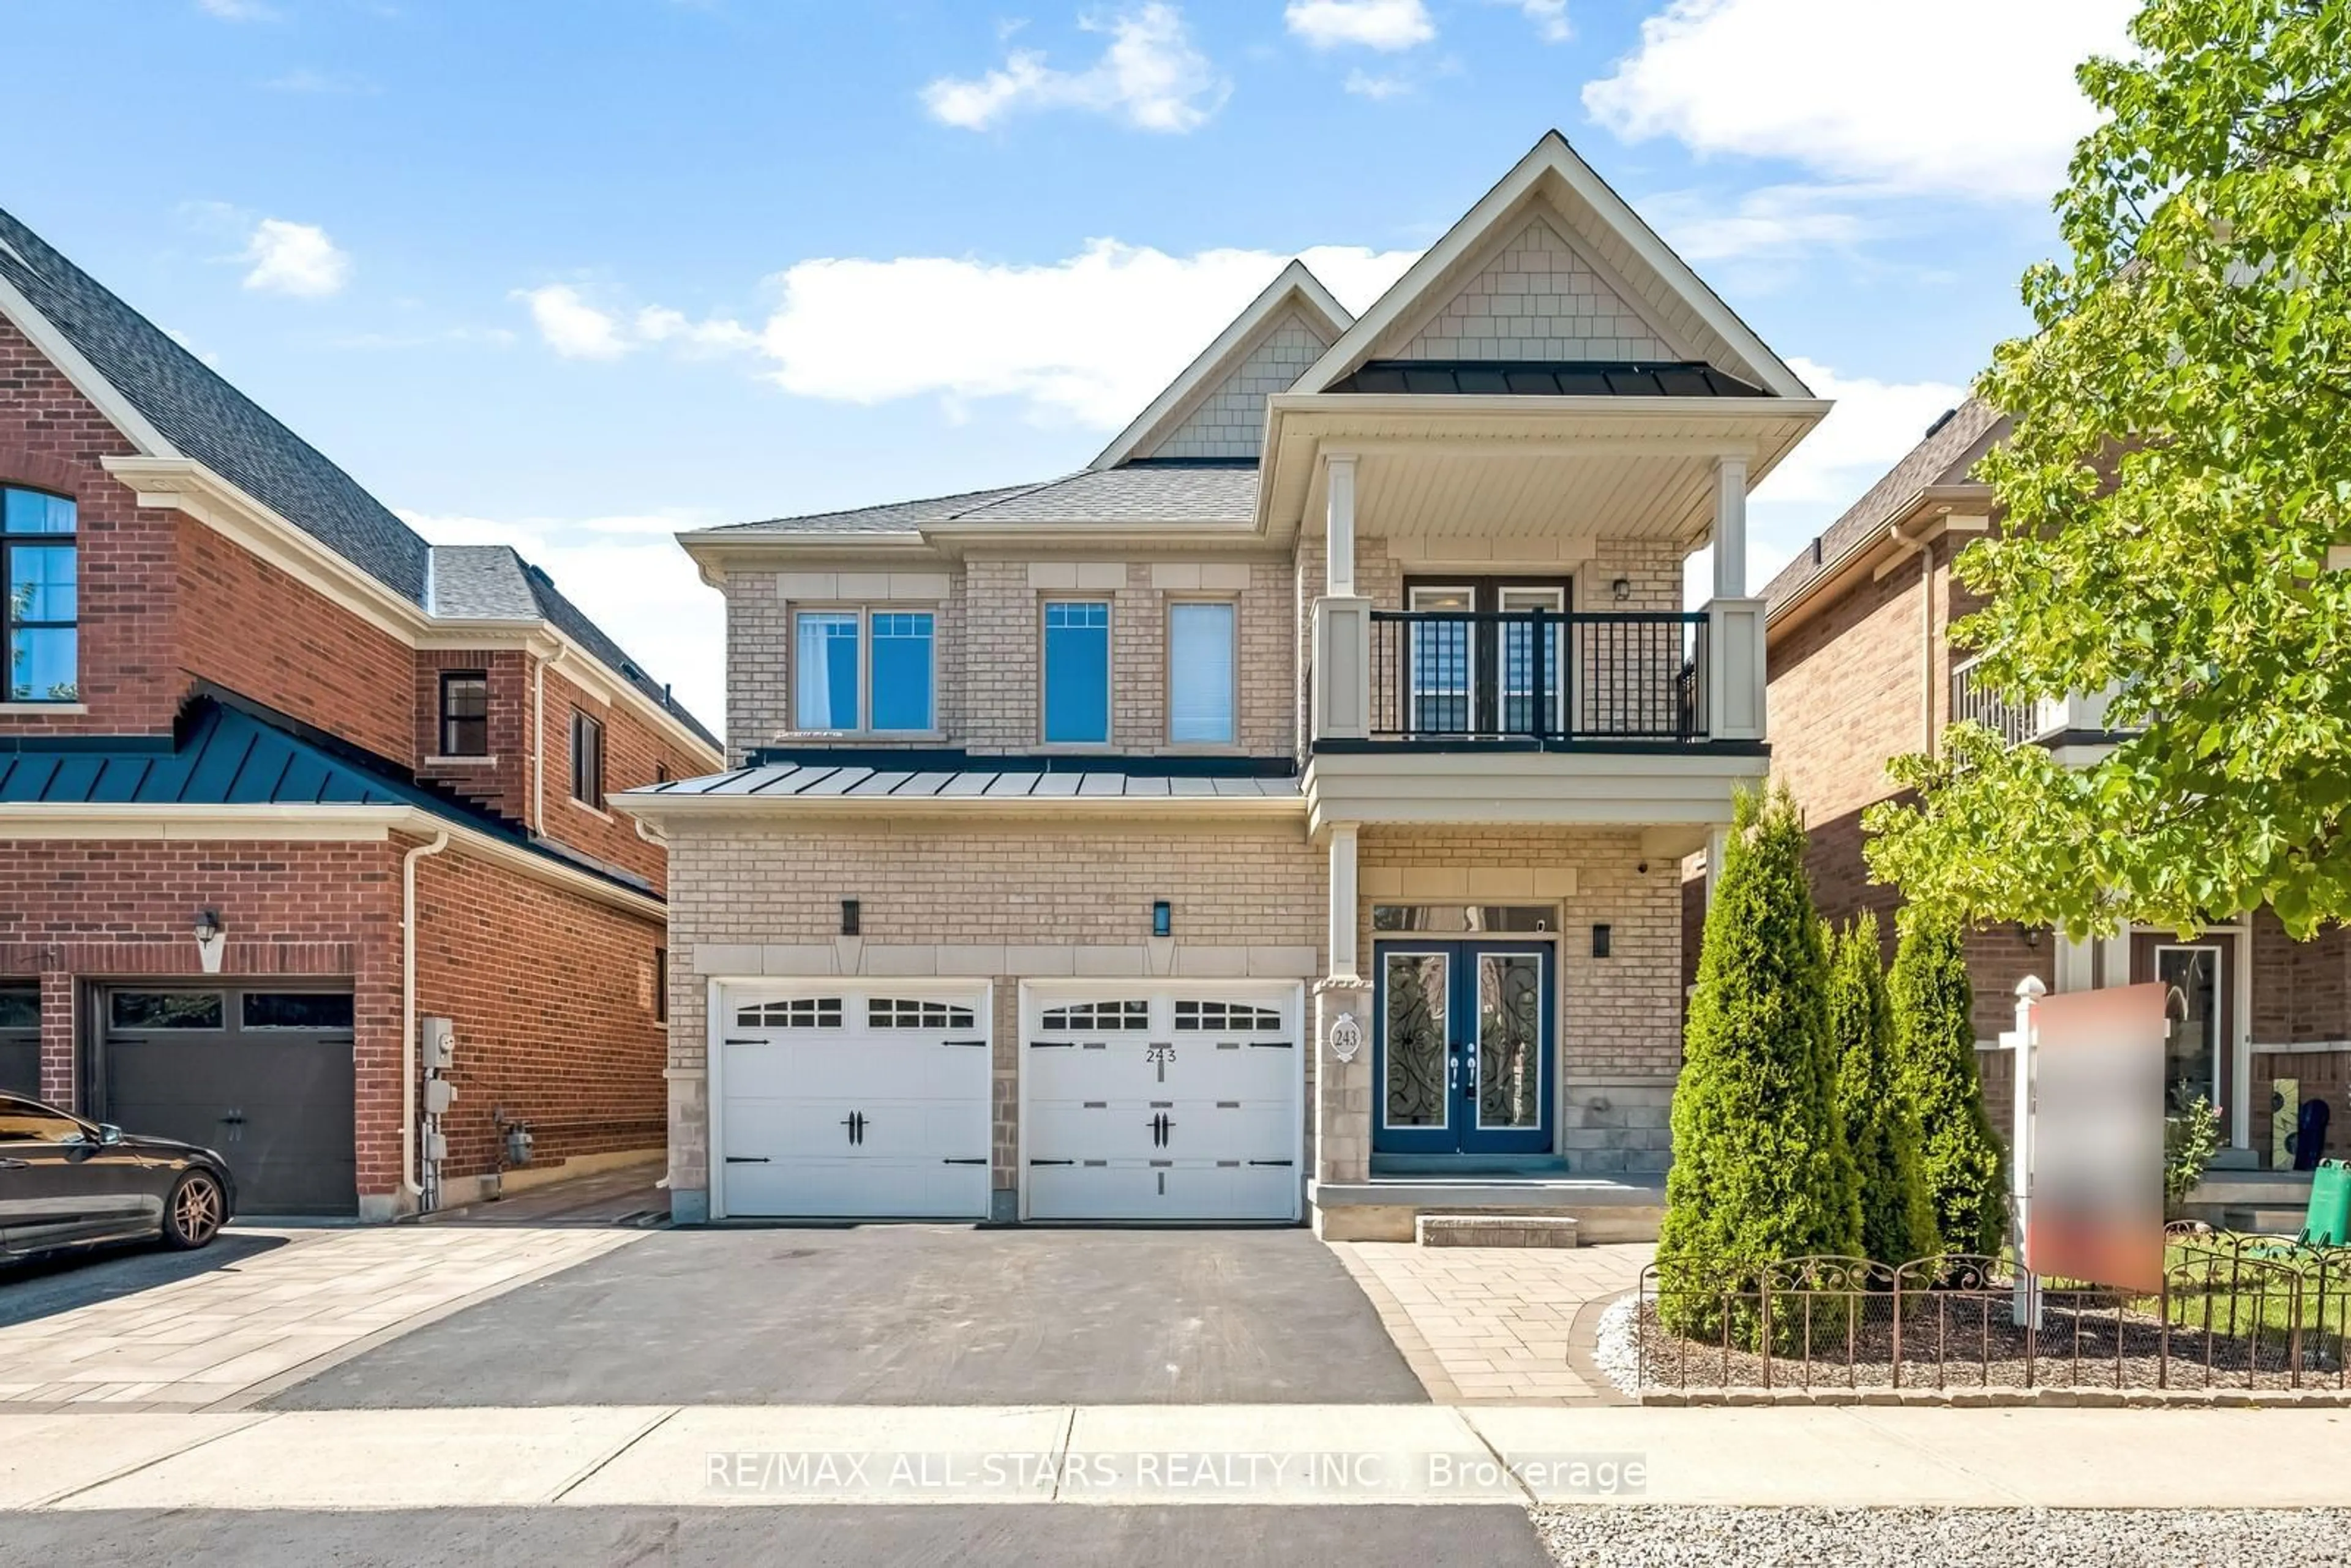 Home with brick exterior material for 243 John Davis Gate, Whitchurch-Stouffville Ontario L4A 1T5